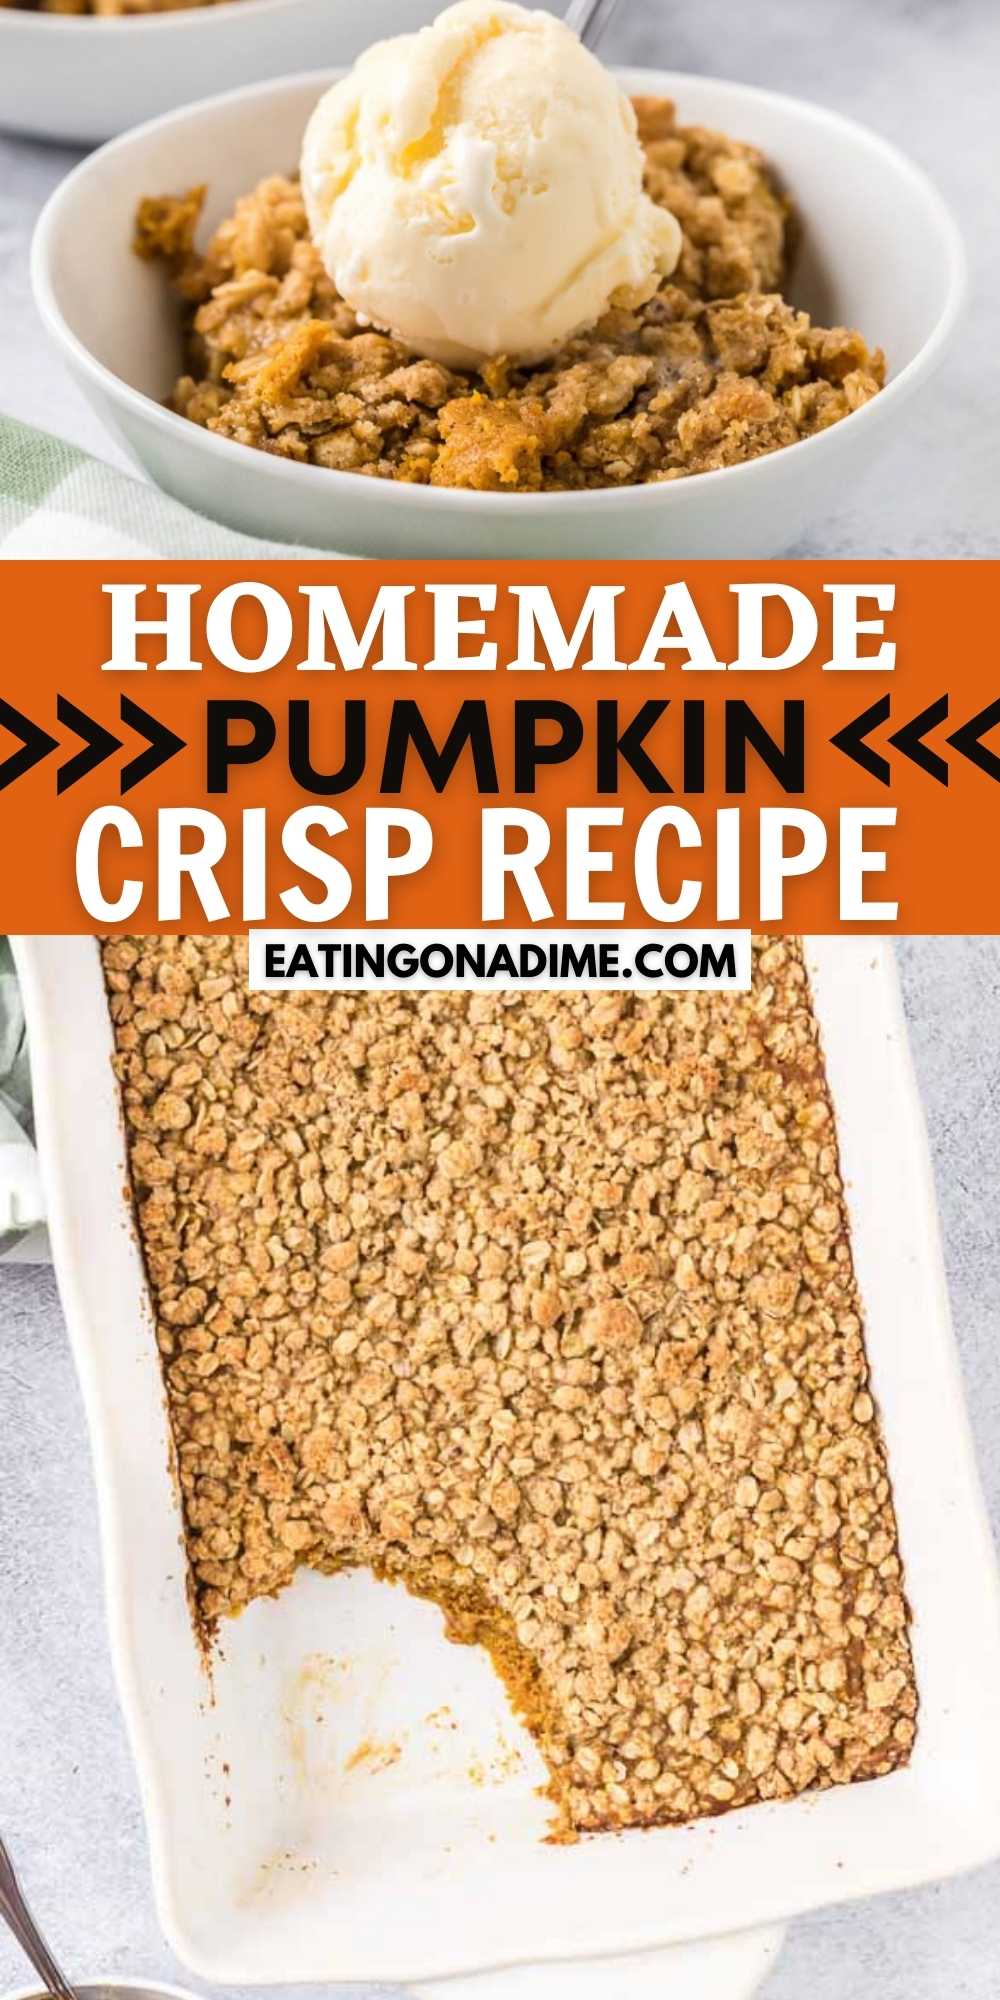 Pumpkin Crisp is a fun and delicious Thanksgiving dessert that will quickly become your new favorite dessert recipe! This quick and easy Fall dessert is delicious and a great Thanksgiving dessert. You will love this easy to make delicious pumpkin recipe.  #eatingonadime #pumpkinrecipes #pumpkincrisp #falldesserts 
